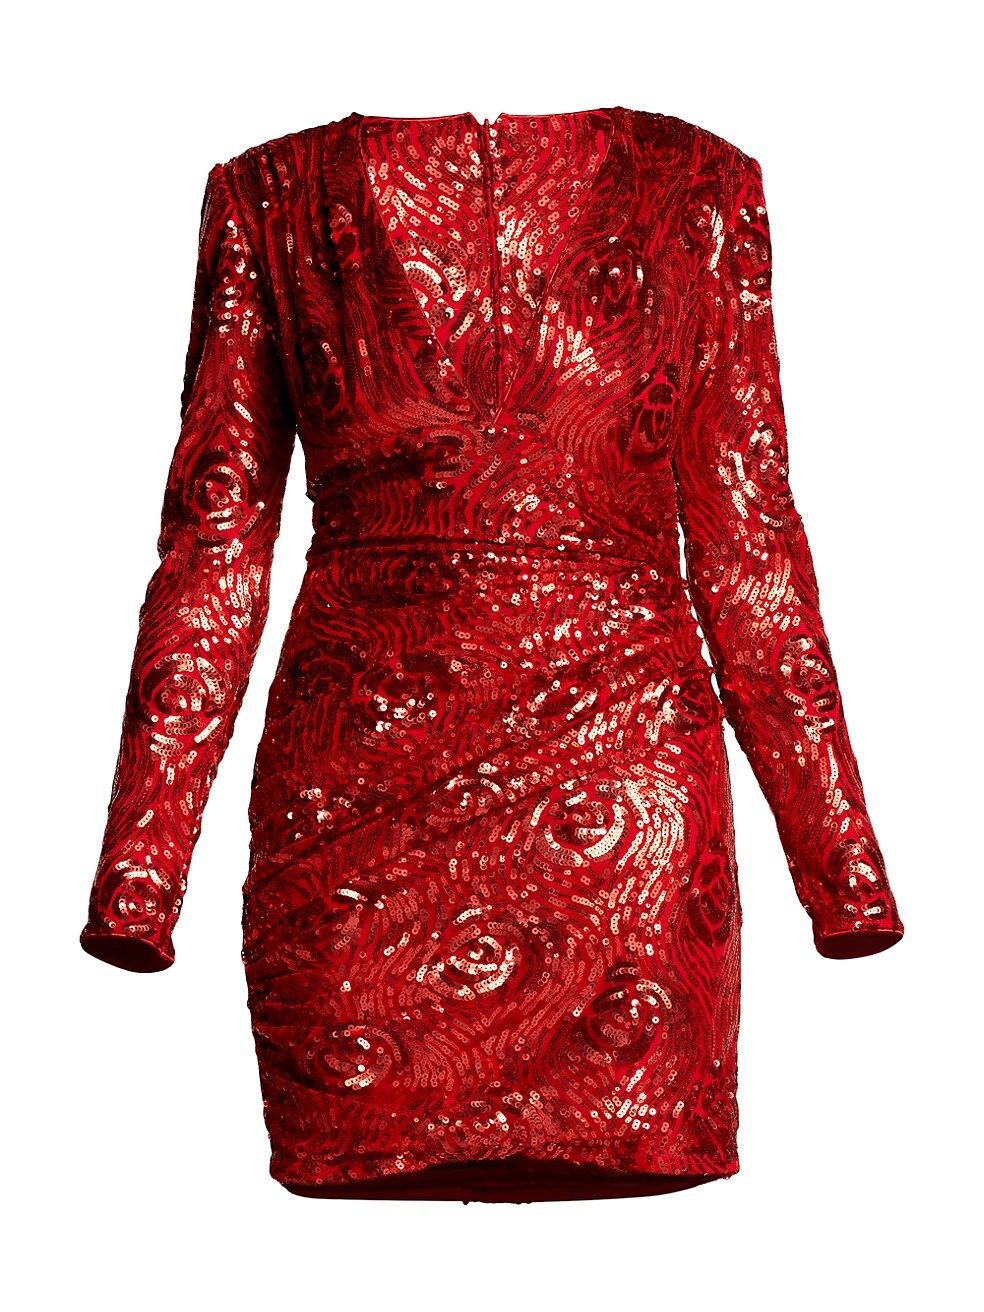 Swirled Sequin-Embroidered Dress | Saks Fifth Avenue